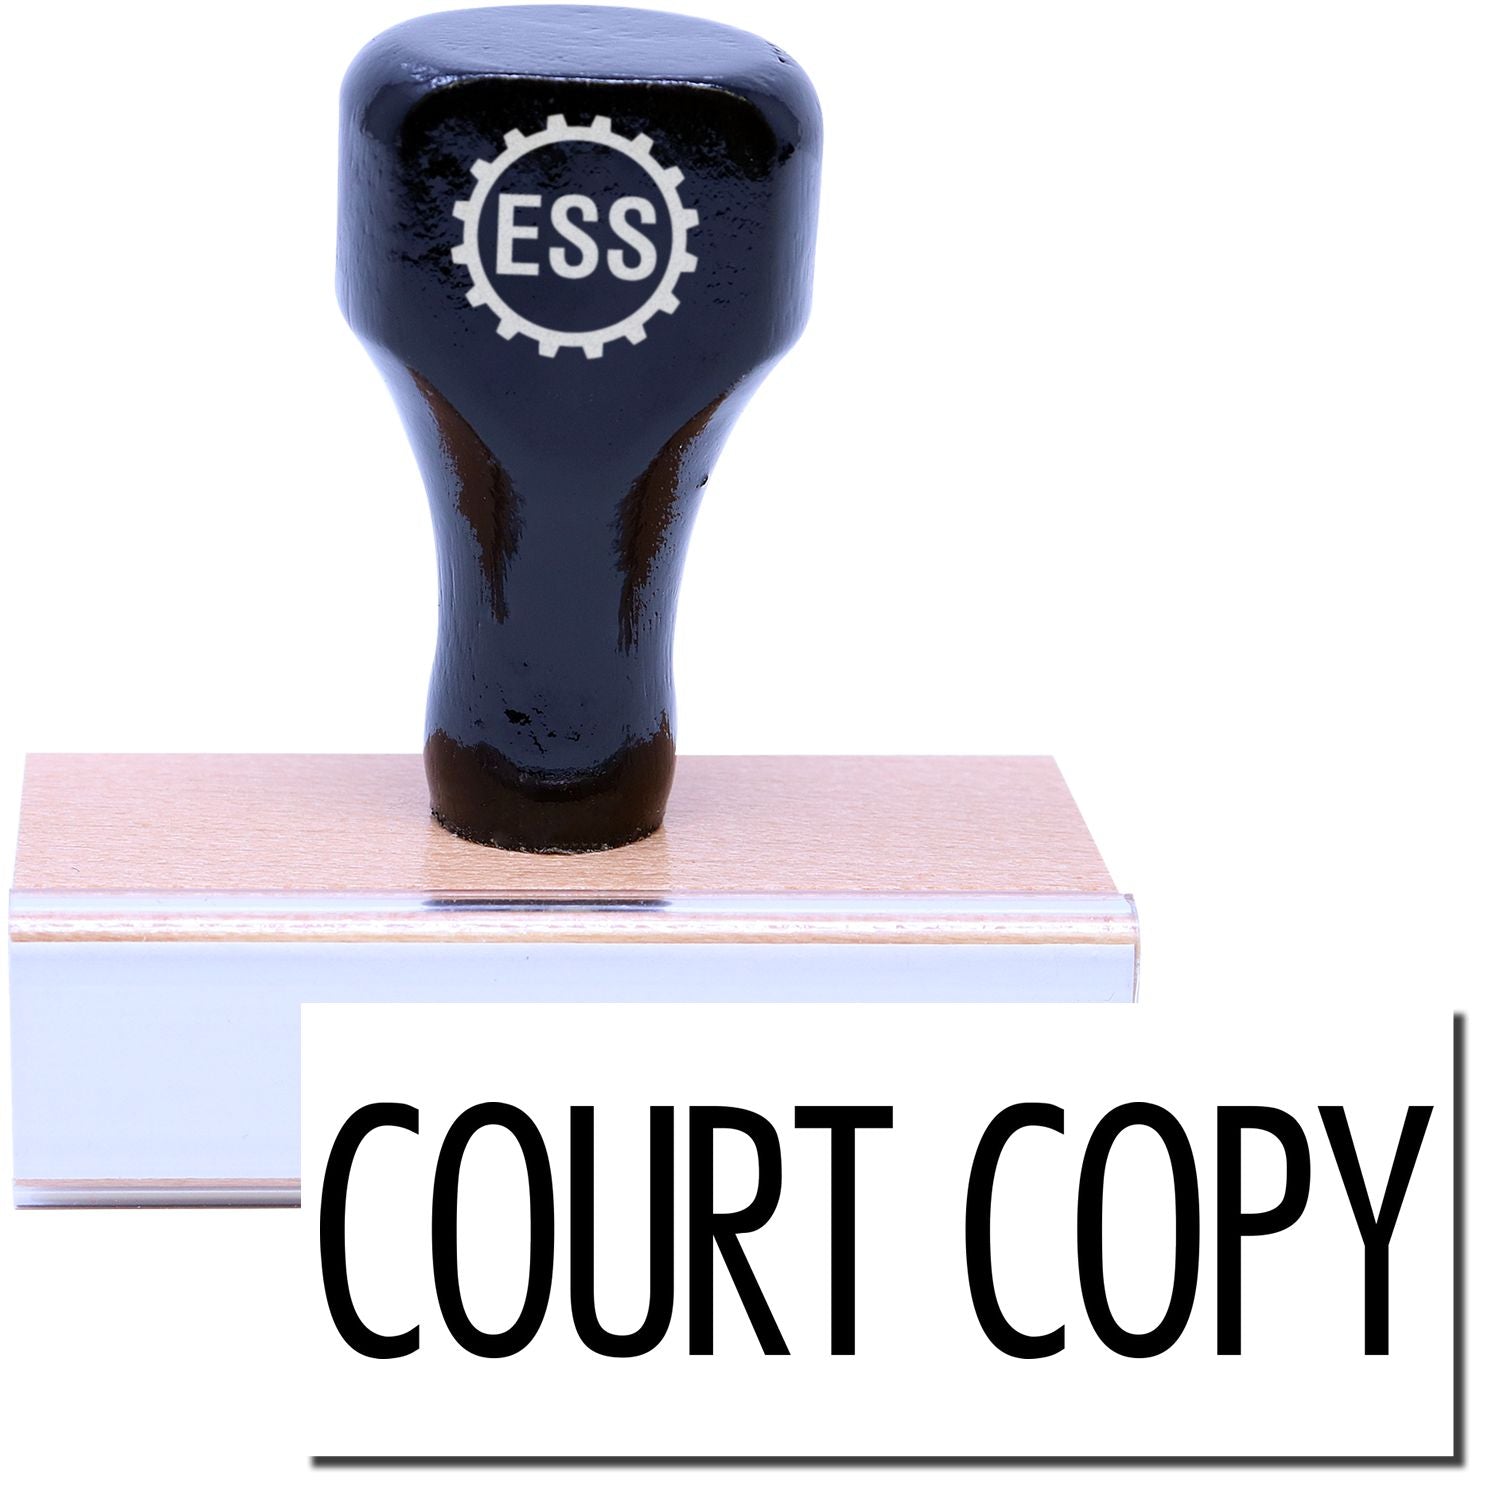 A stock office rubber stamp with a stamped image showing how the text "COURT COPY" in a large narrow font is displayed after stamping.